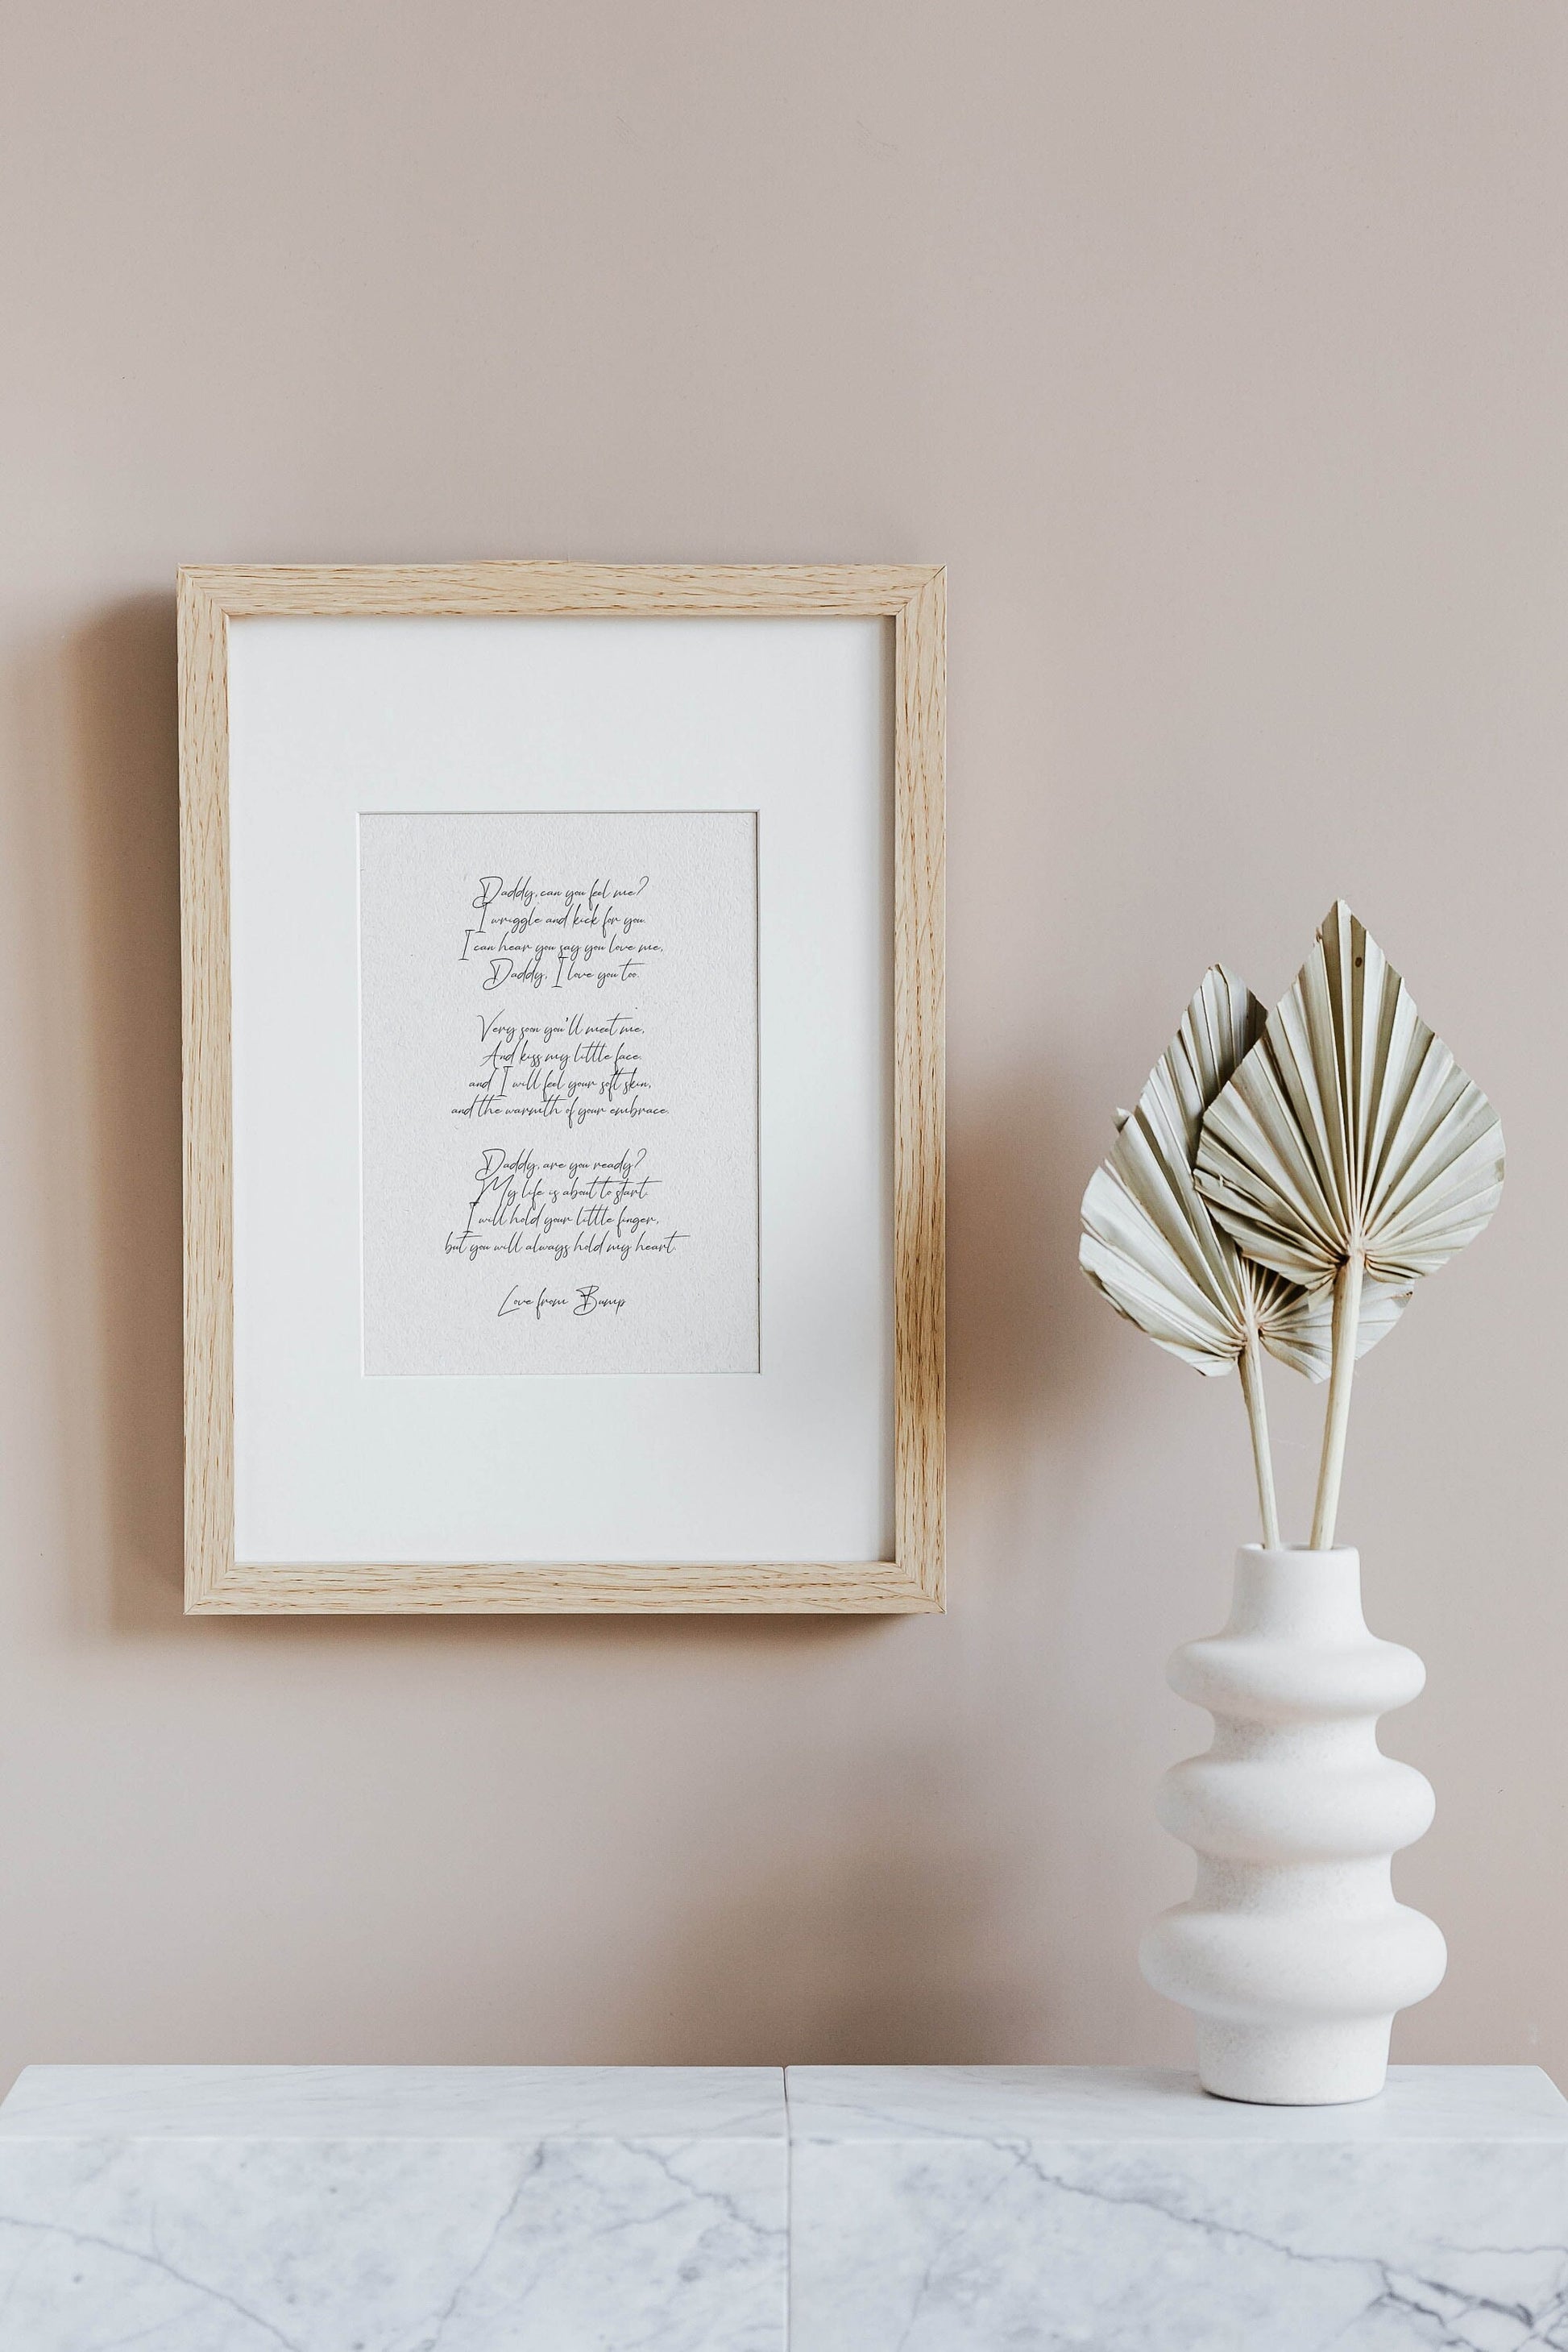 Daddy to be Poem for new Dad Print Framed poem, Dad to be Poem, New parent Framed Calligraphy & Typography New Father